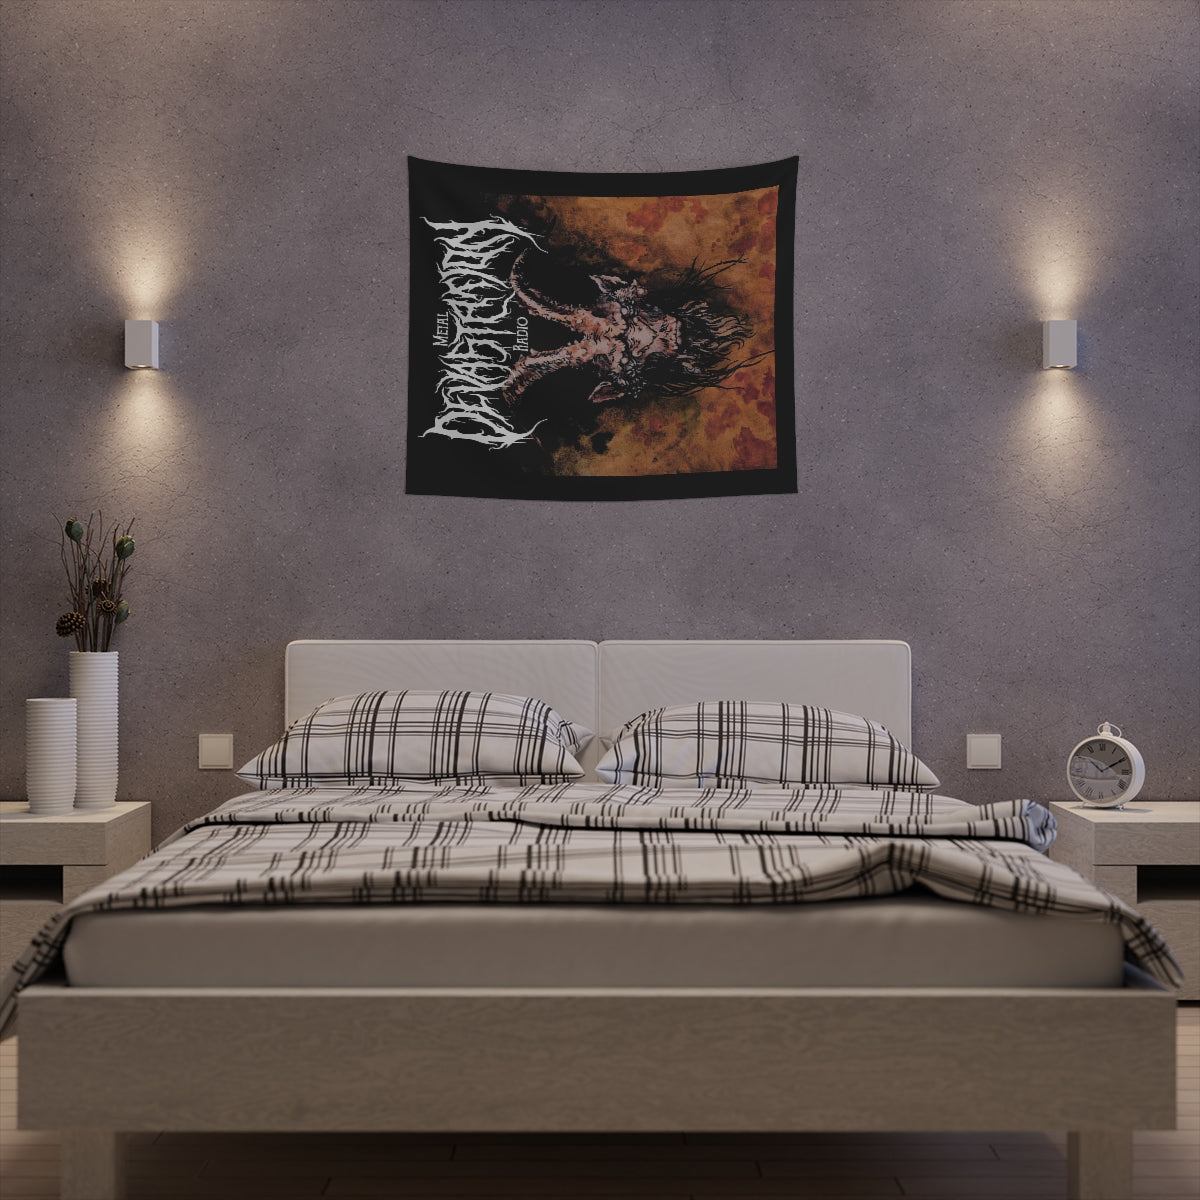 MDR Goat Printed Wall Tapestry